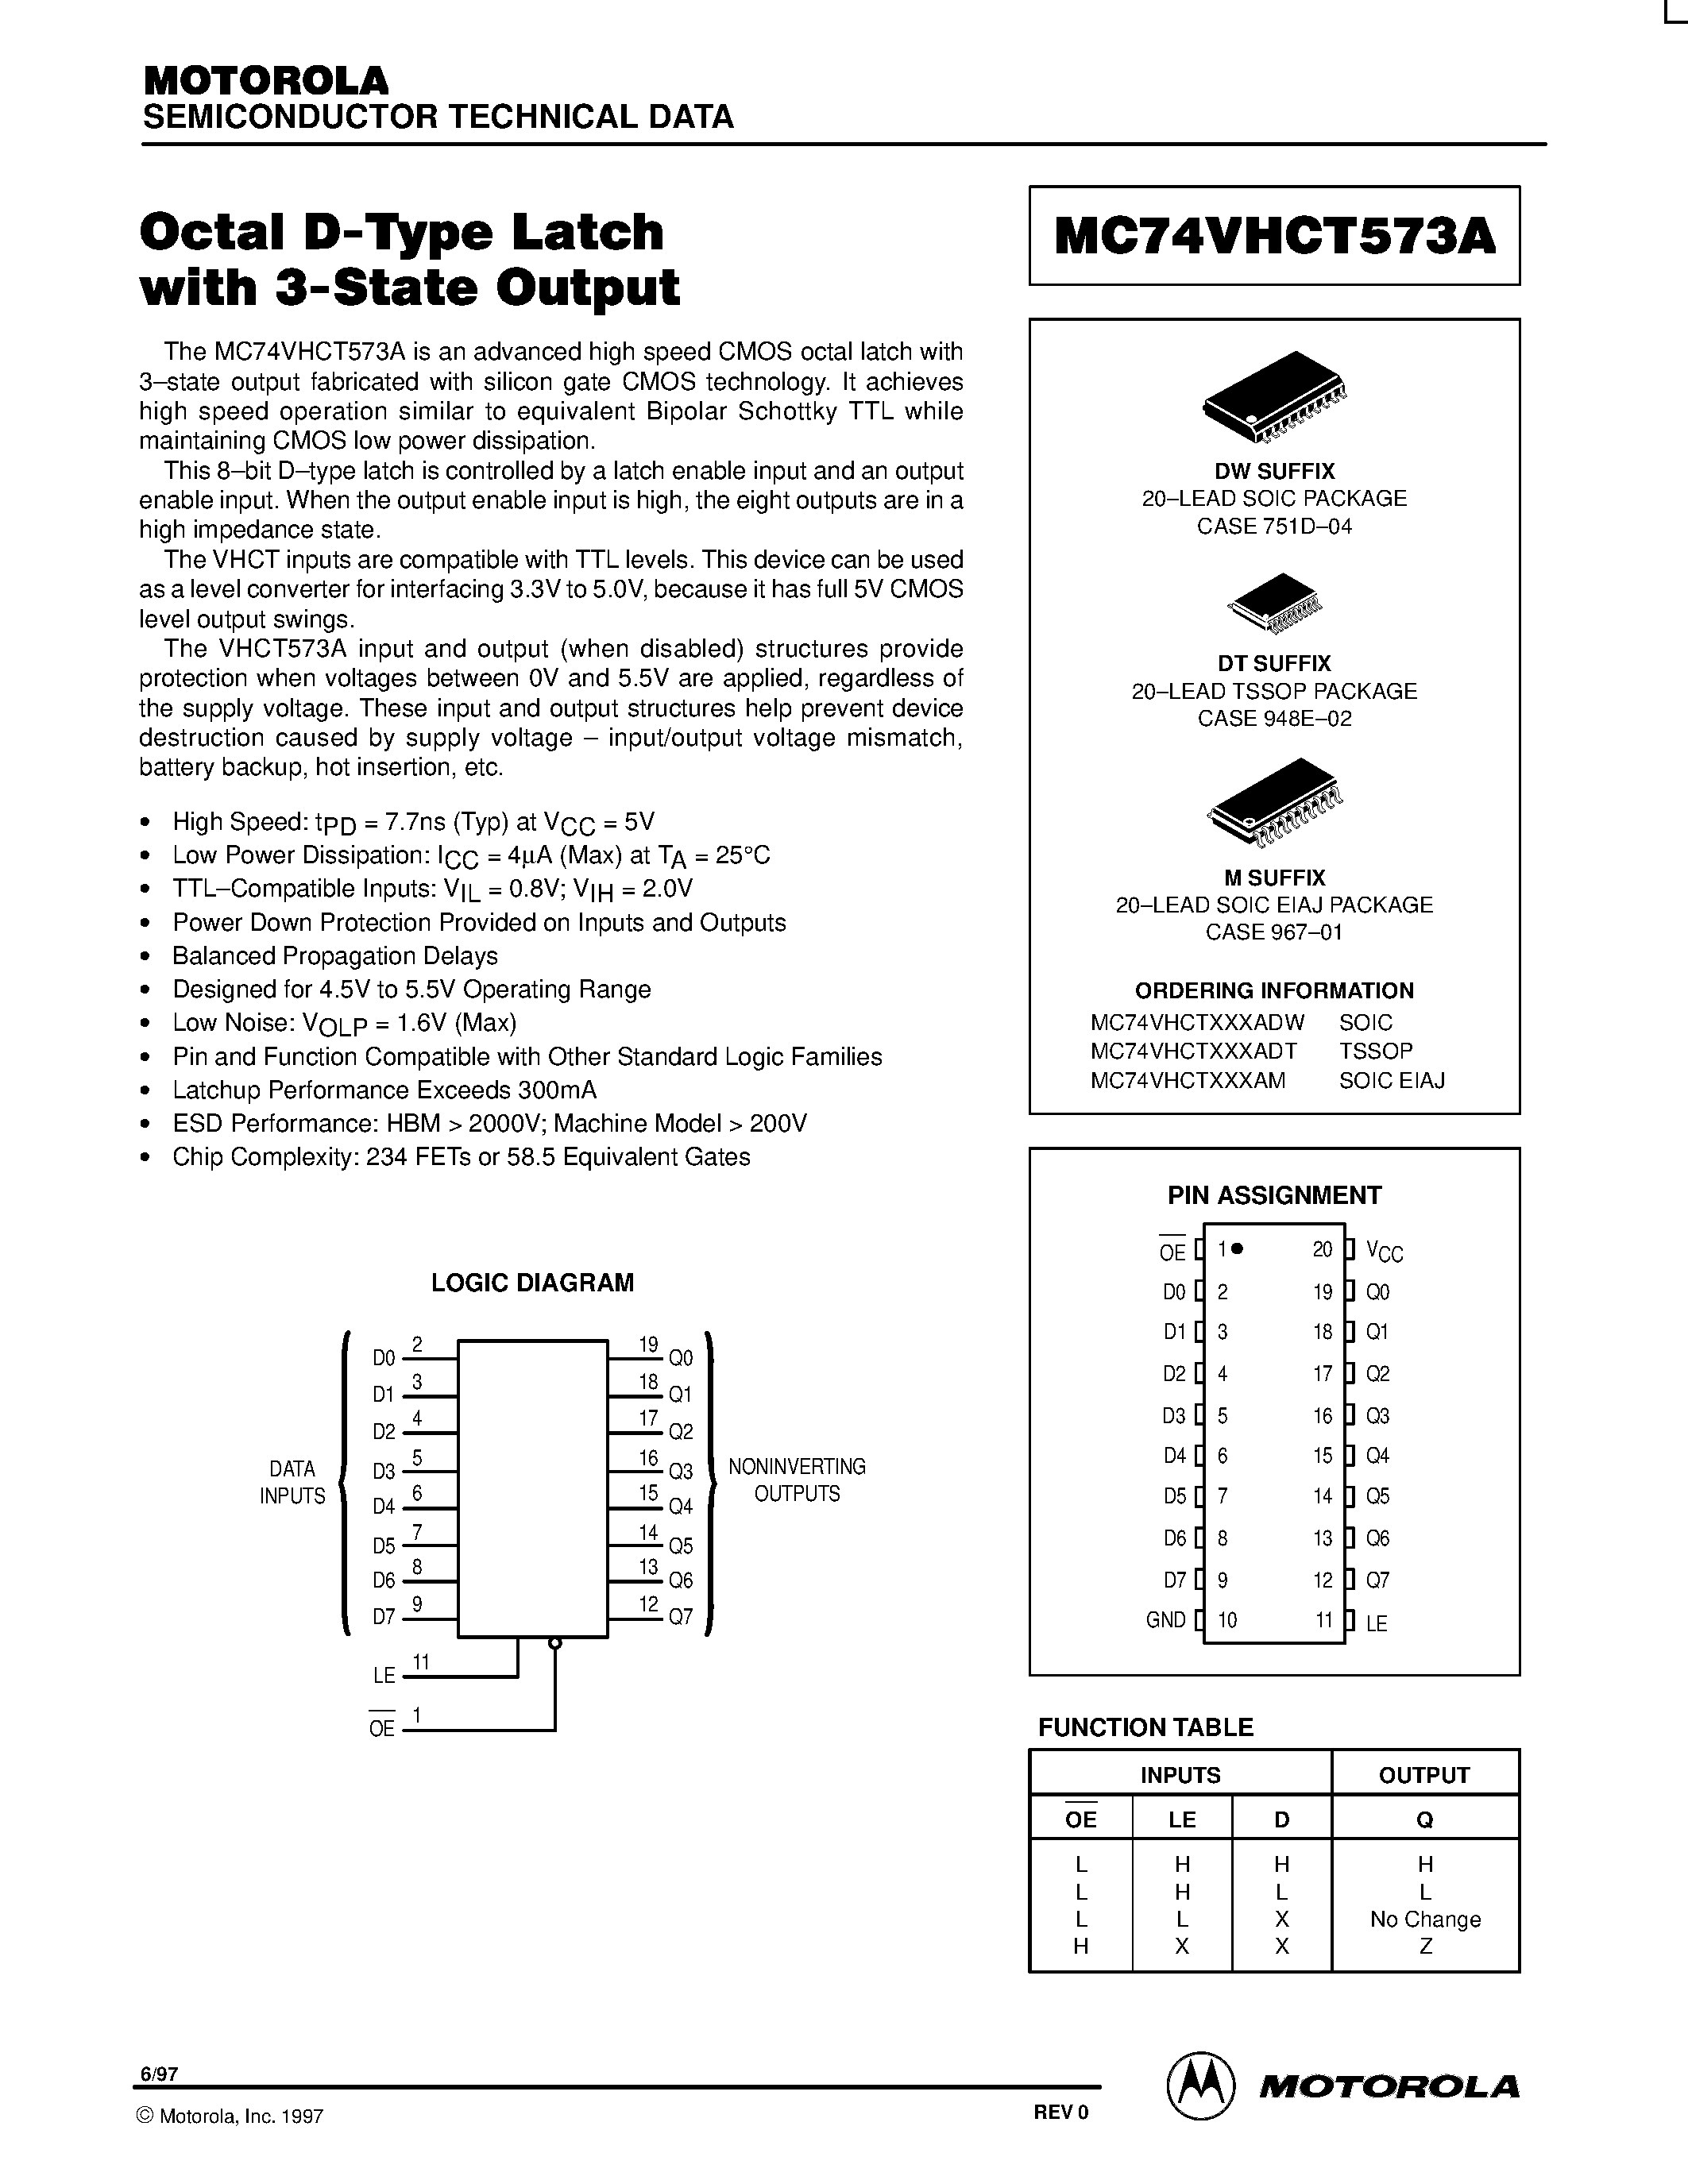 Datasheet MC74VHCT573A - Octal D-Type Latch with 3-State Output page 1